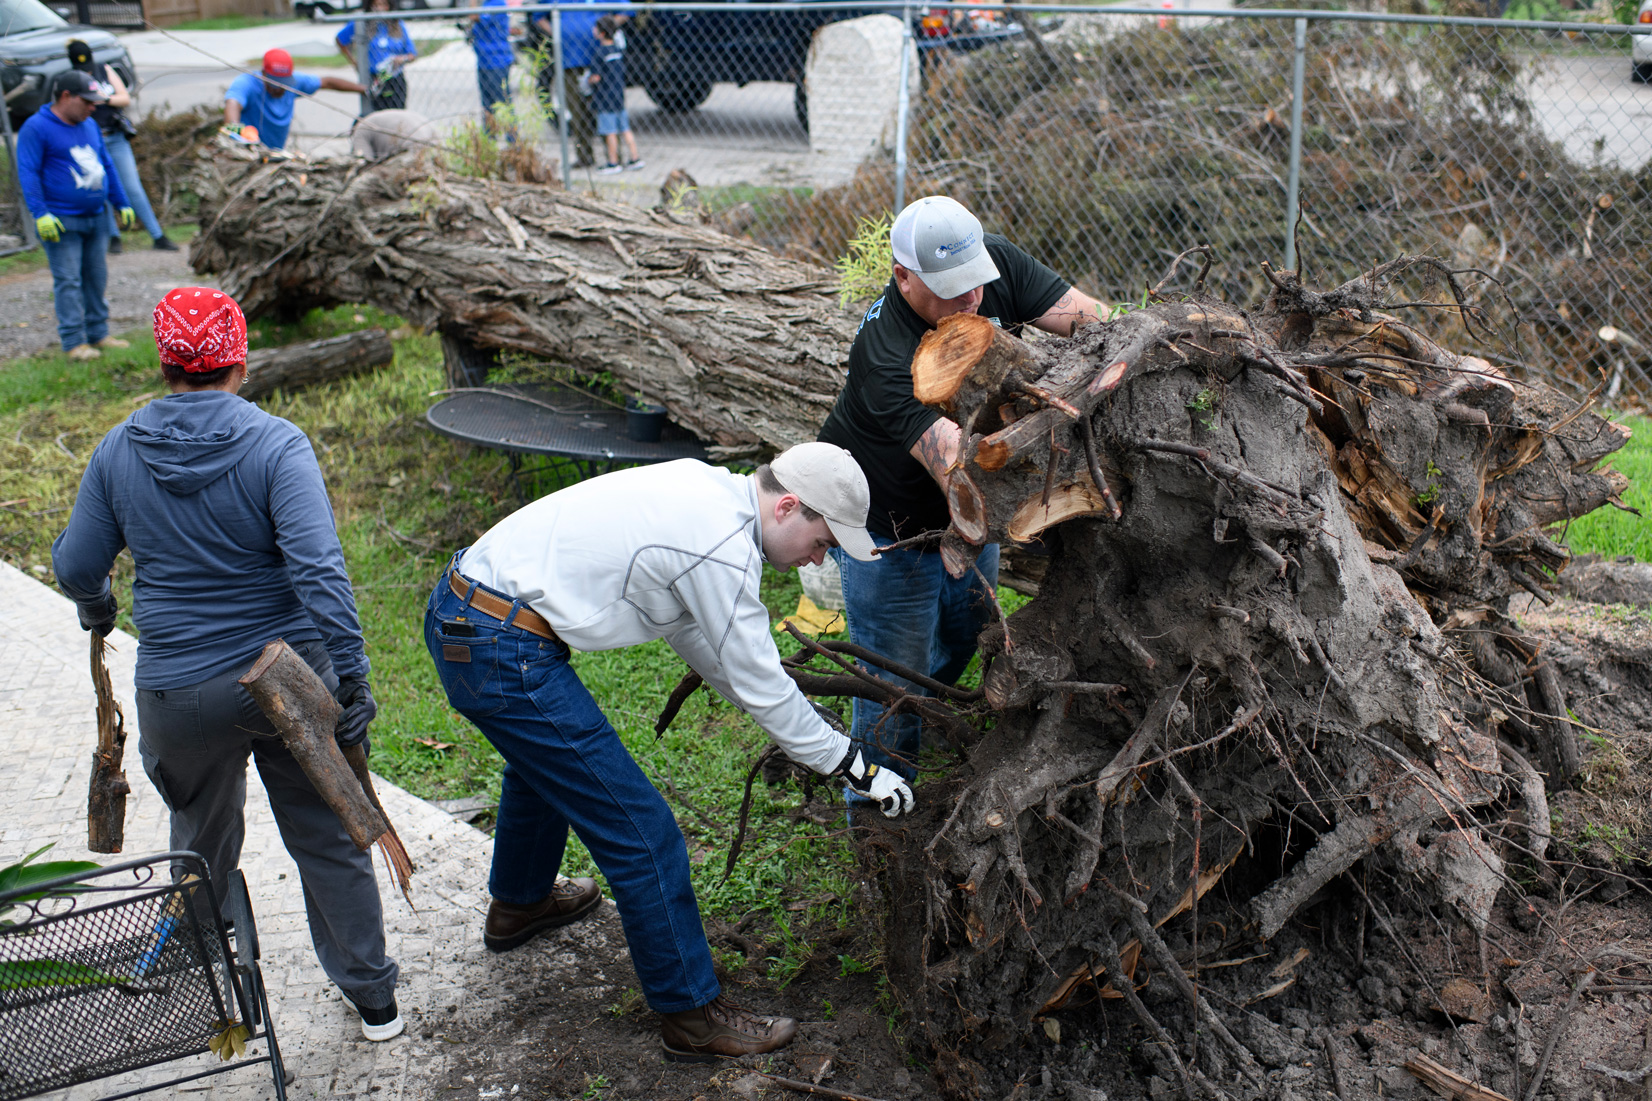 The Houston derecho toppled thousands of trees. These volunteers are removing some of them for free.